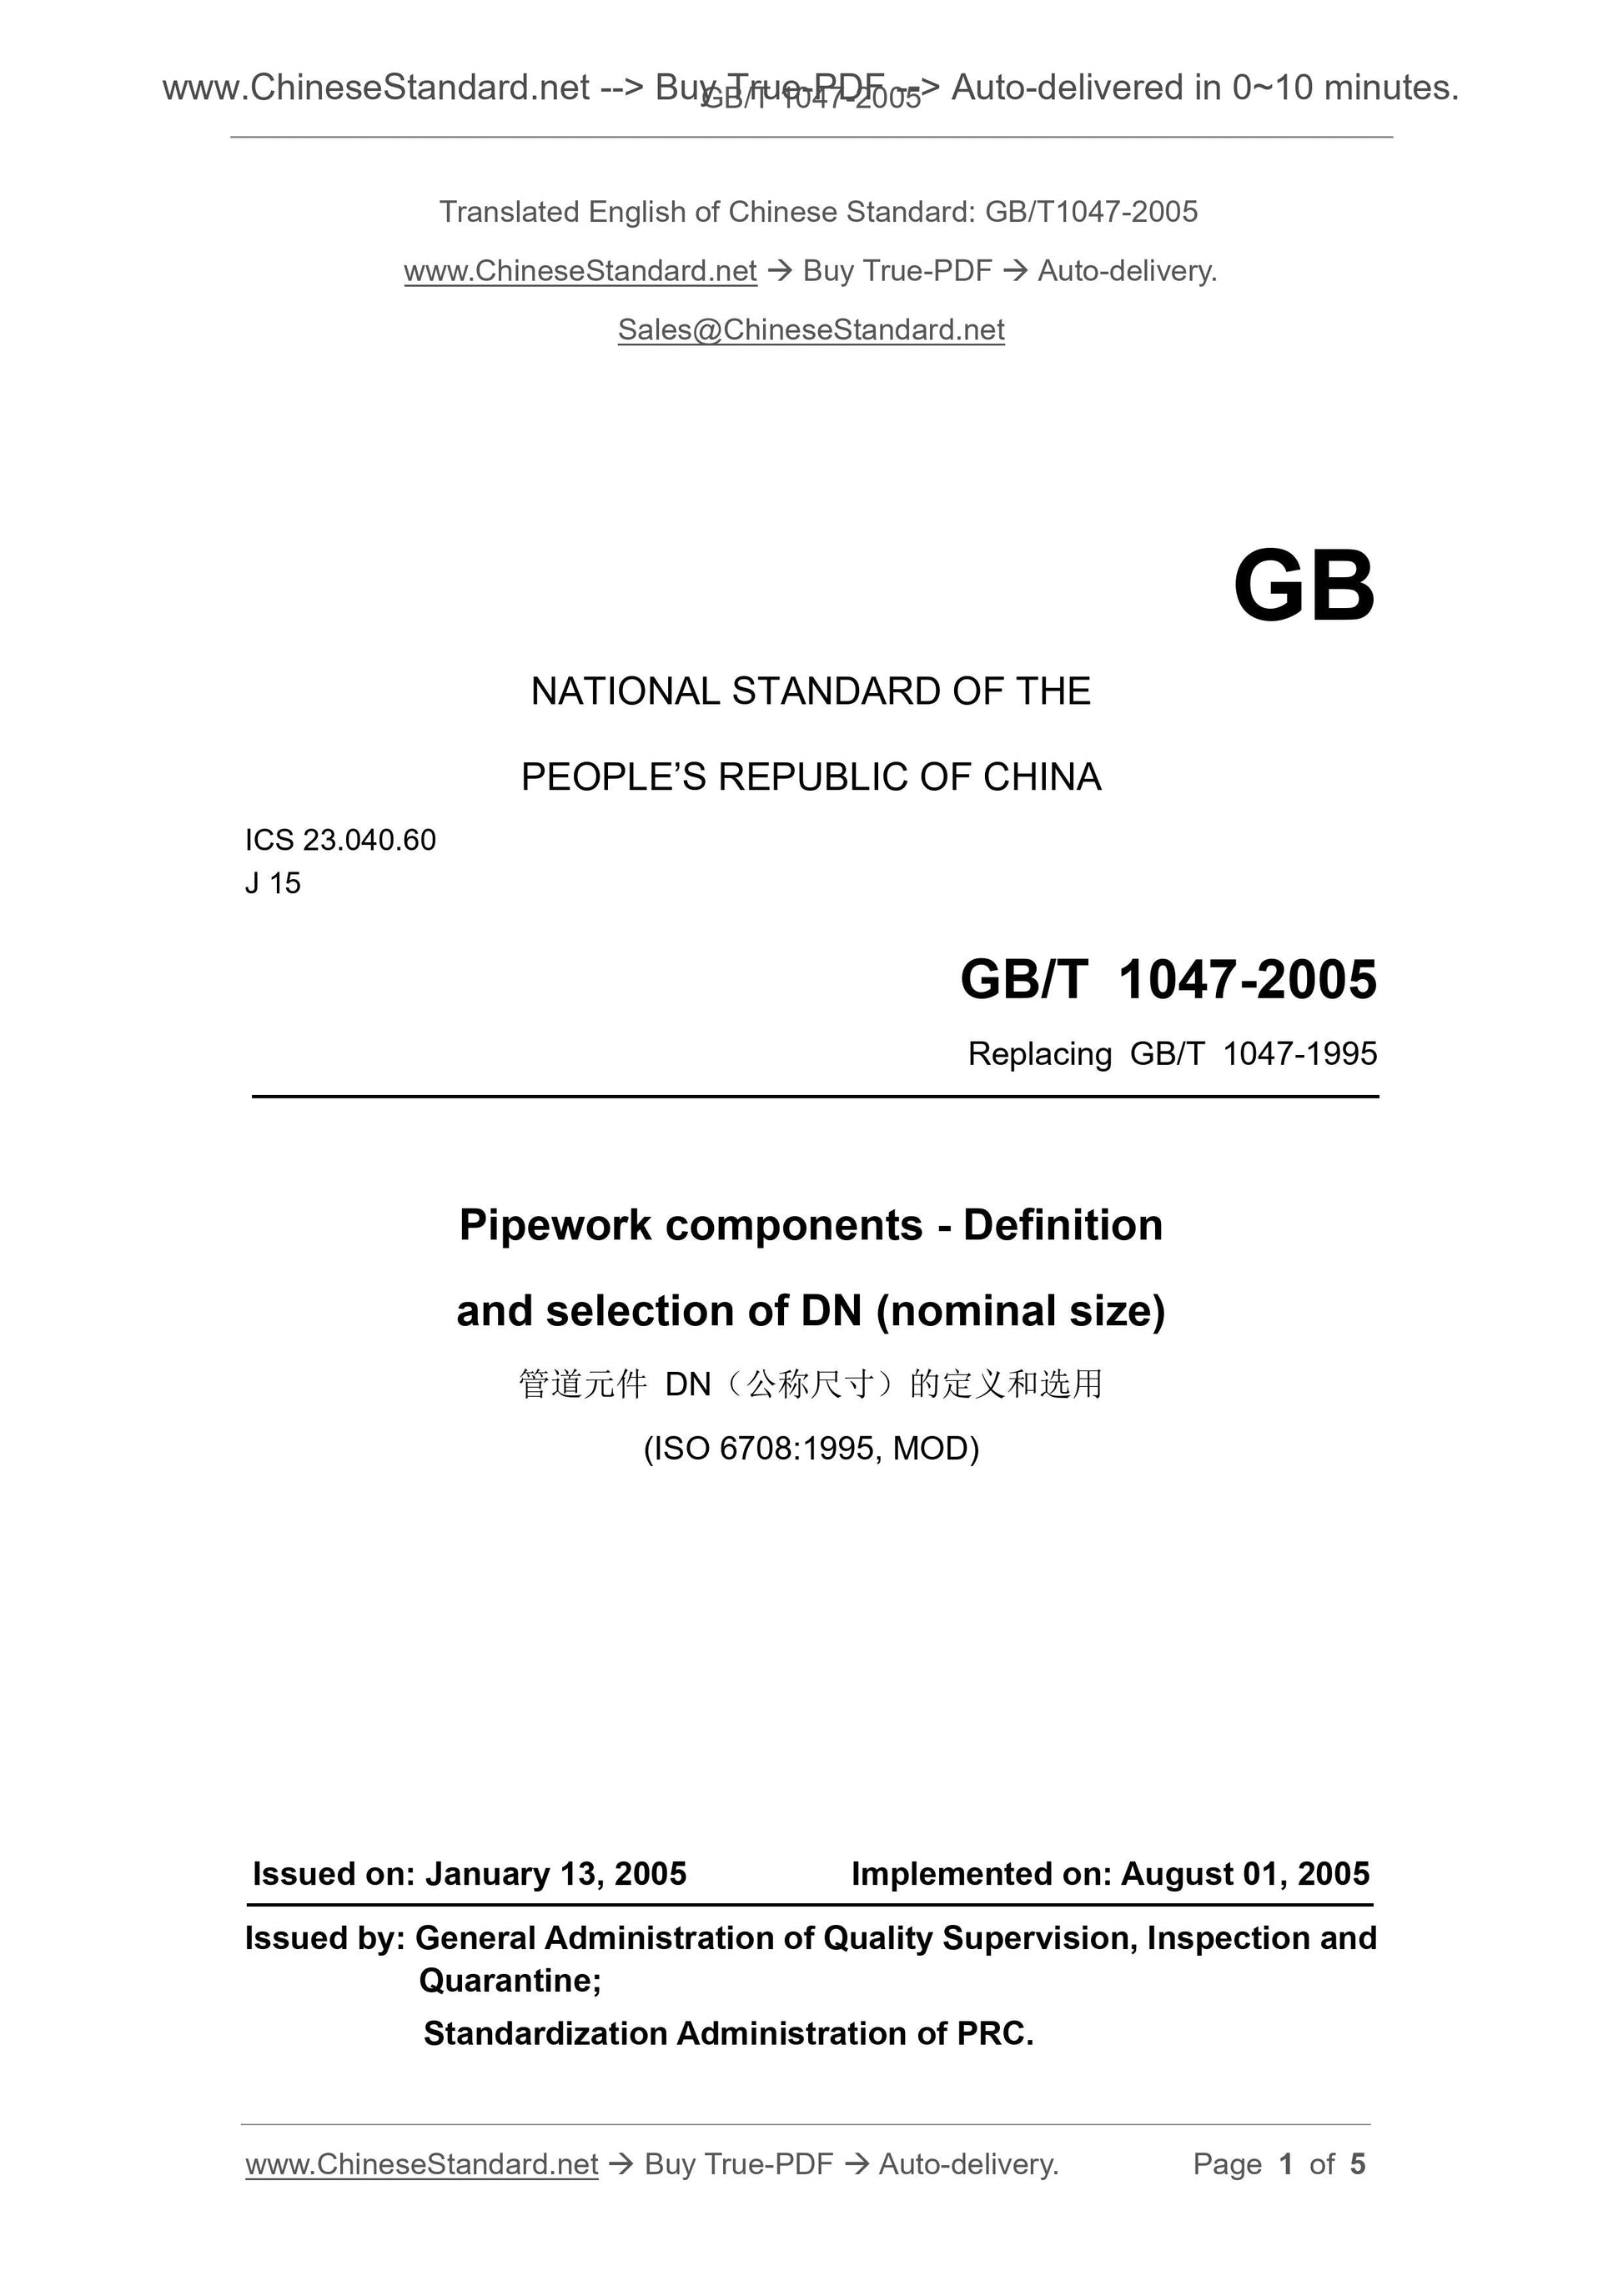 GB/T 1047-2005 Page 1